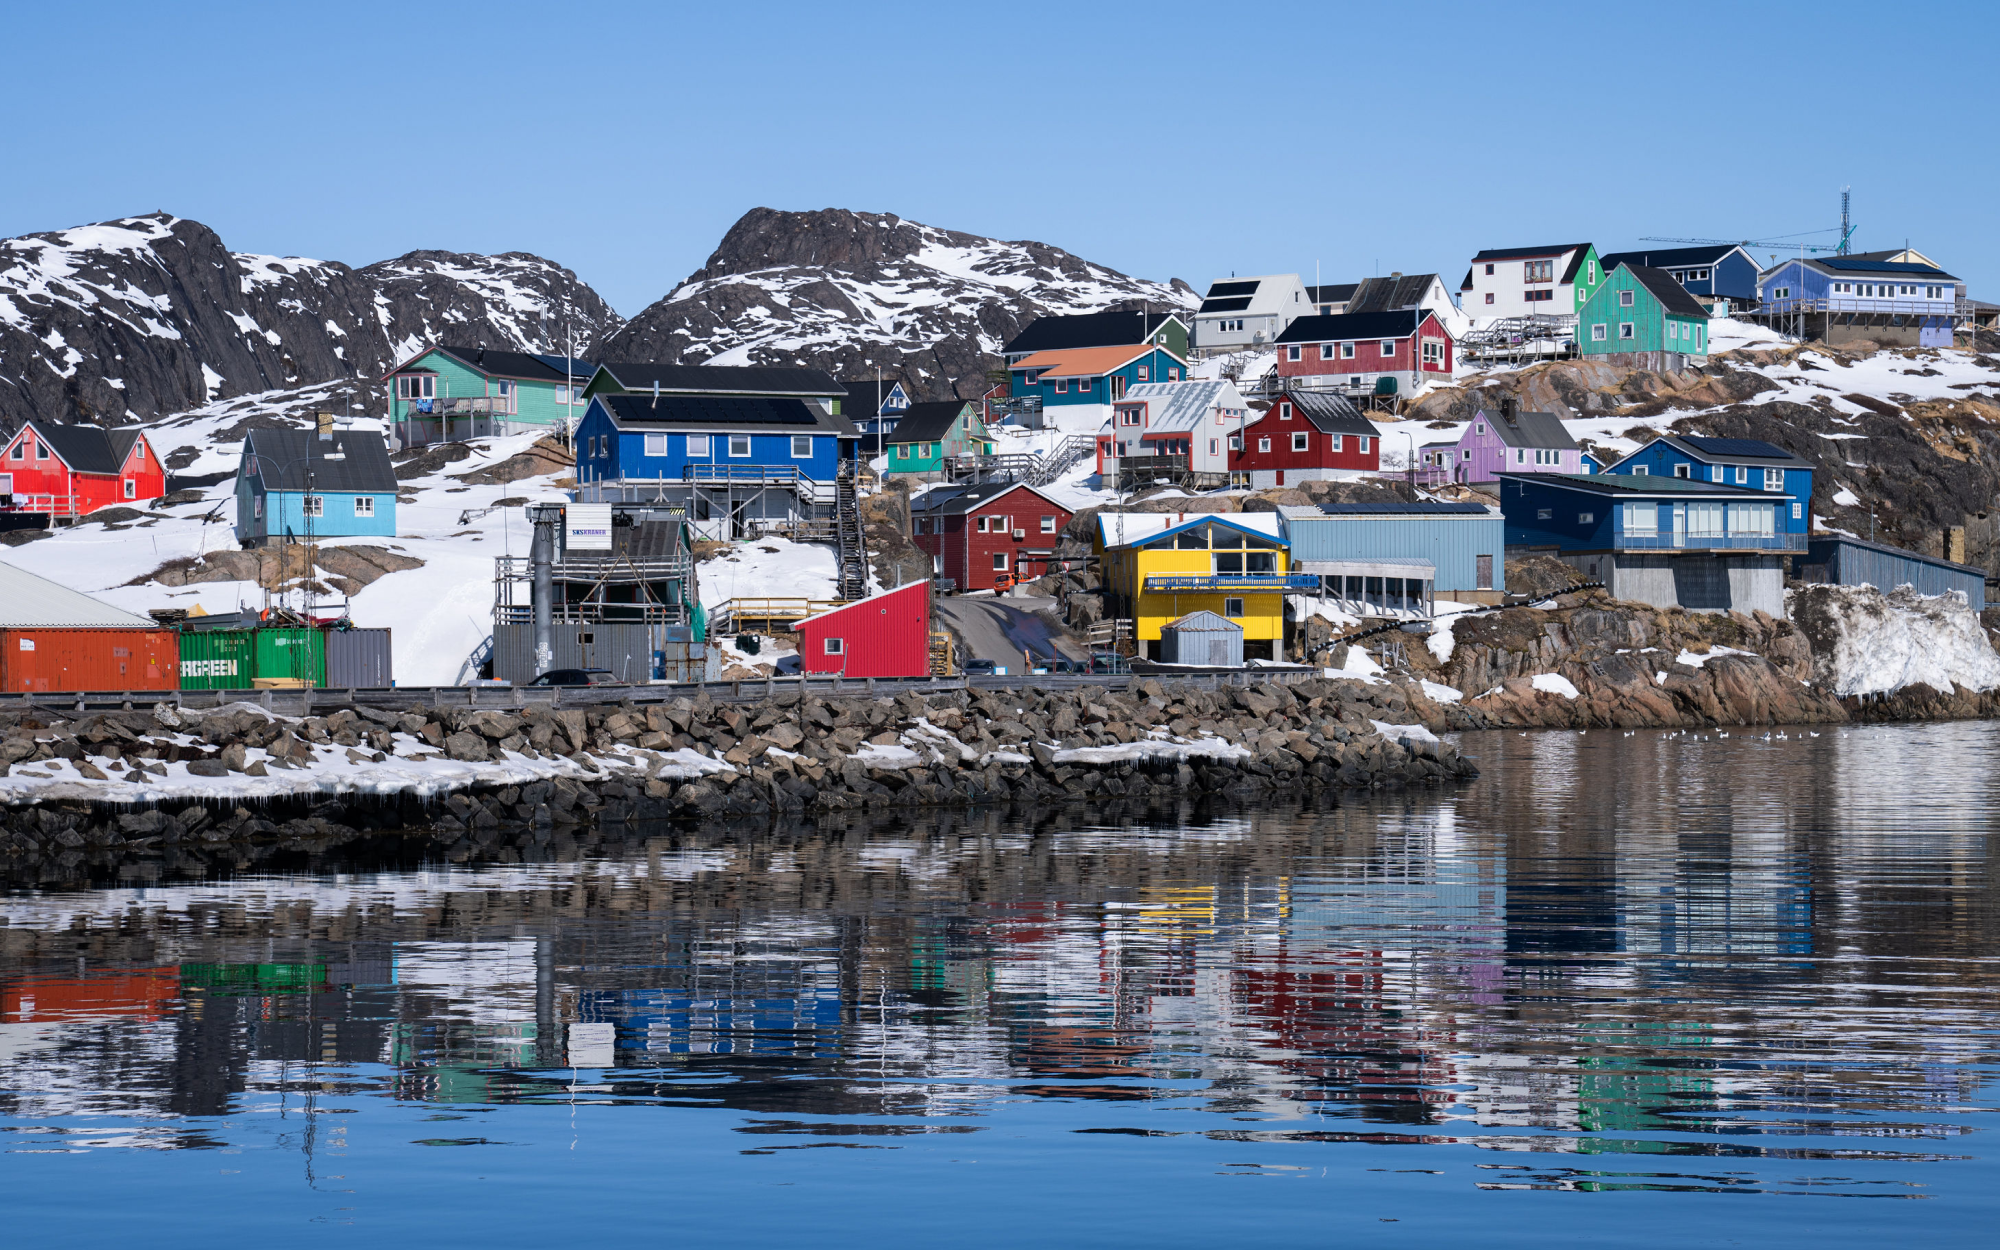 Landscape image of a town in Greenland.